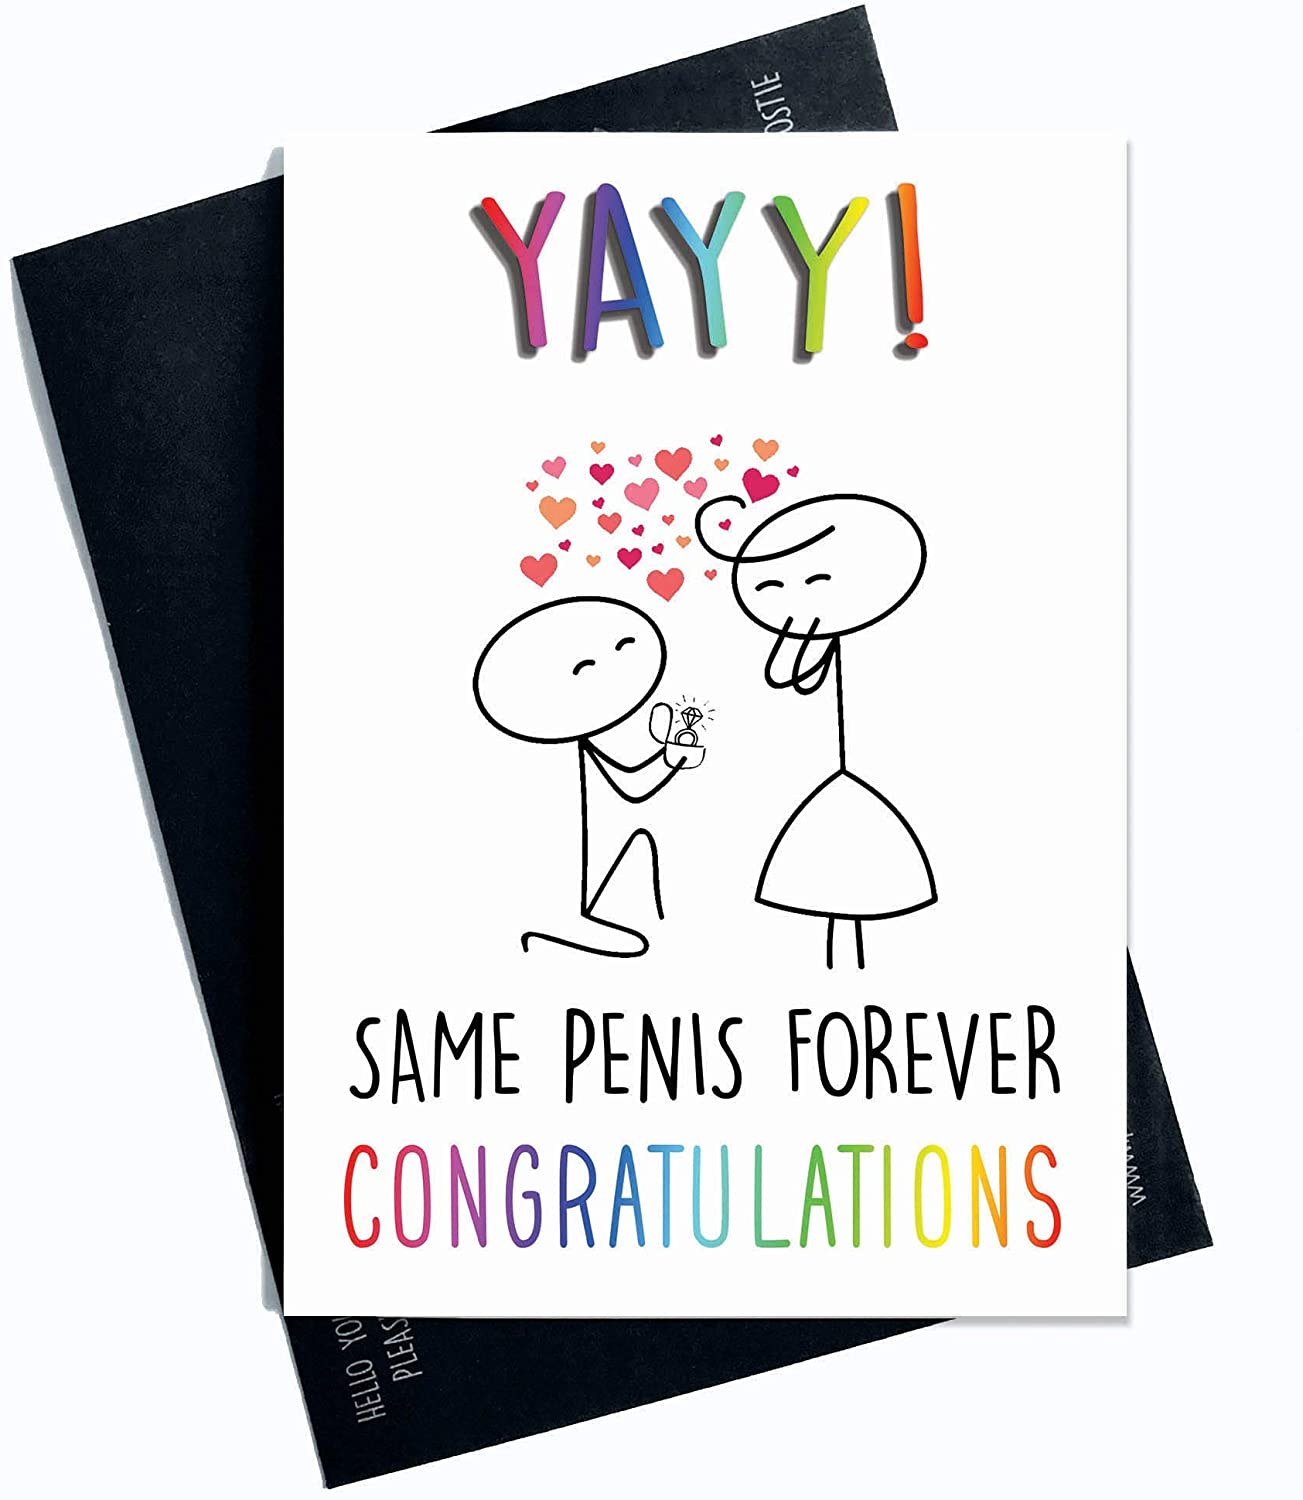 Peachy Antics ''Yayy! Same Penis Forever Congratulations'' Engagement Card RRP £2.88 CLEARANCE XL £1.99